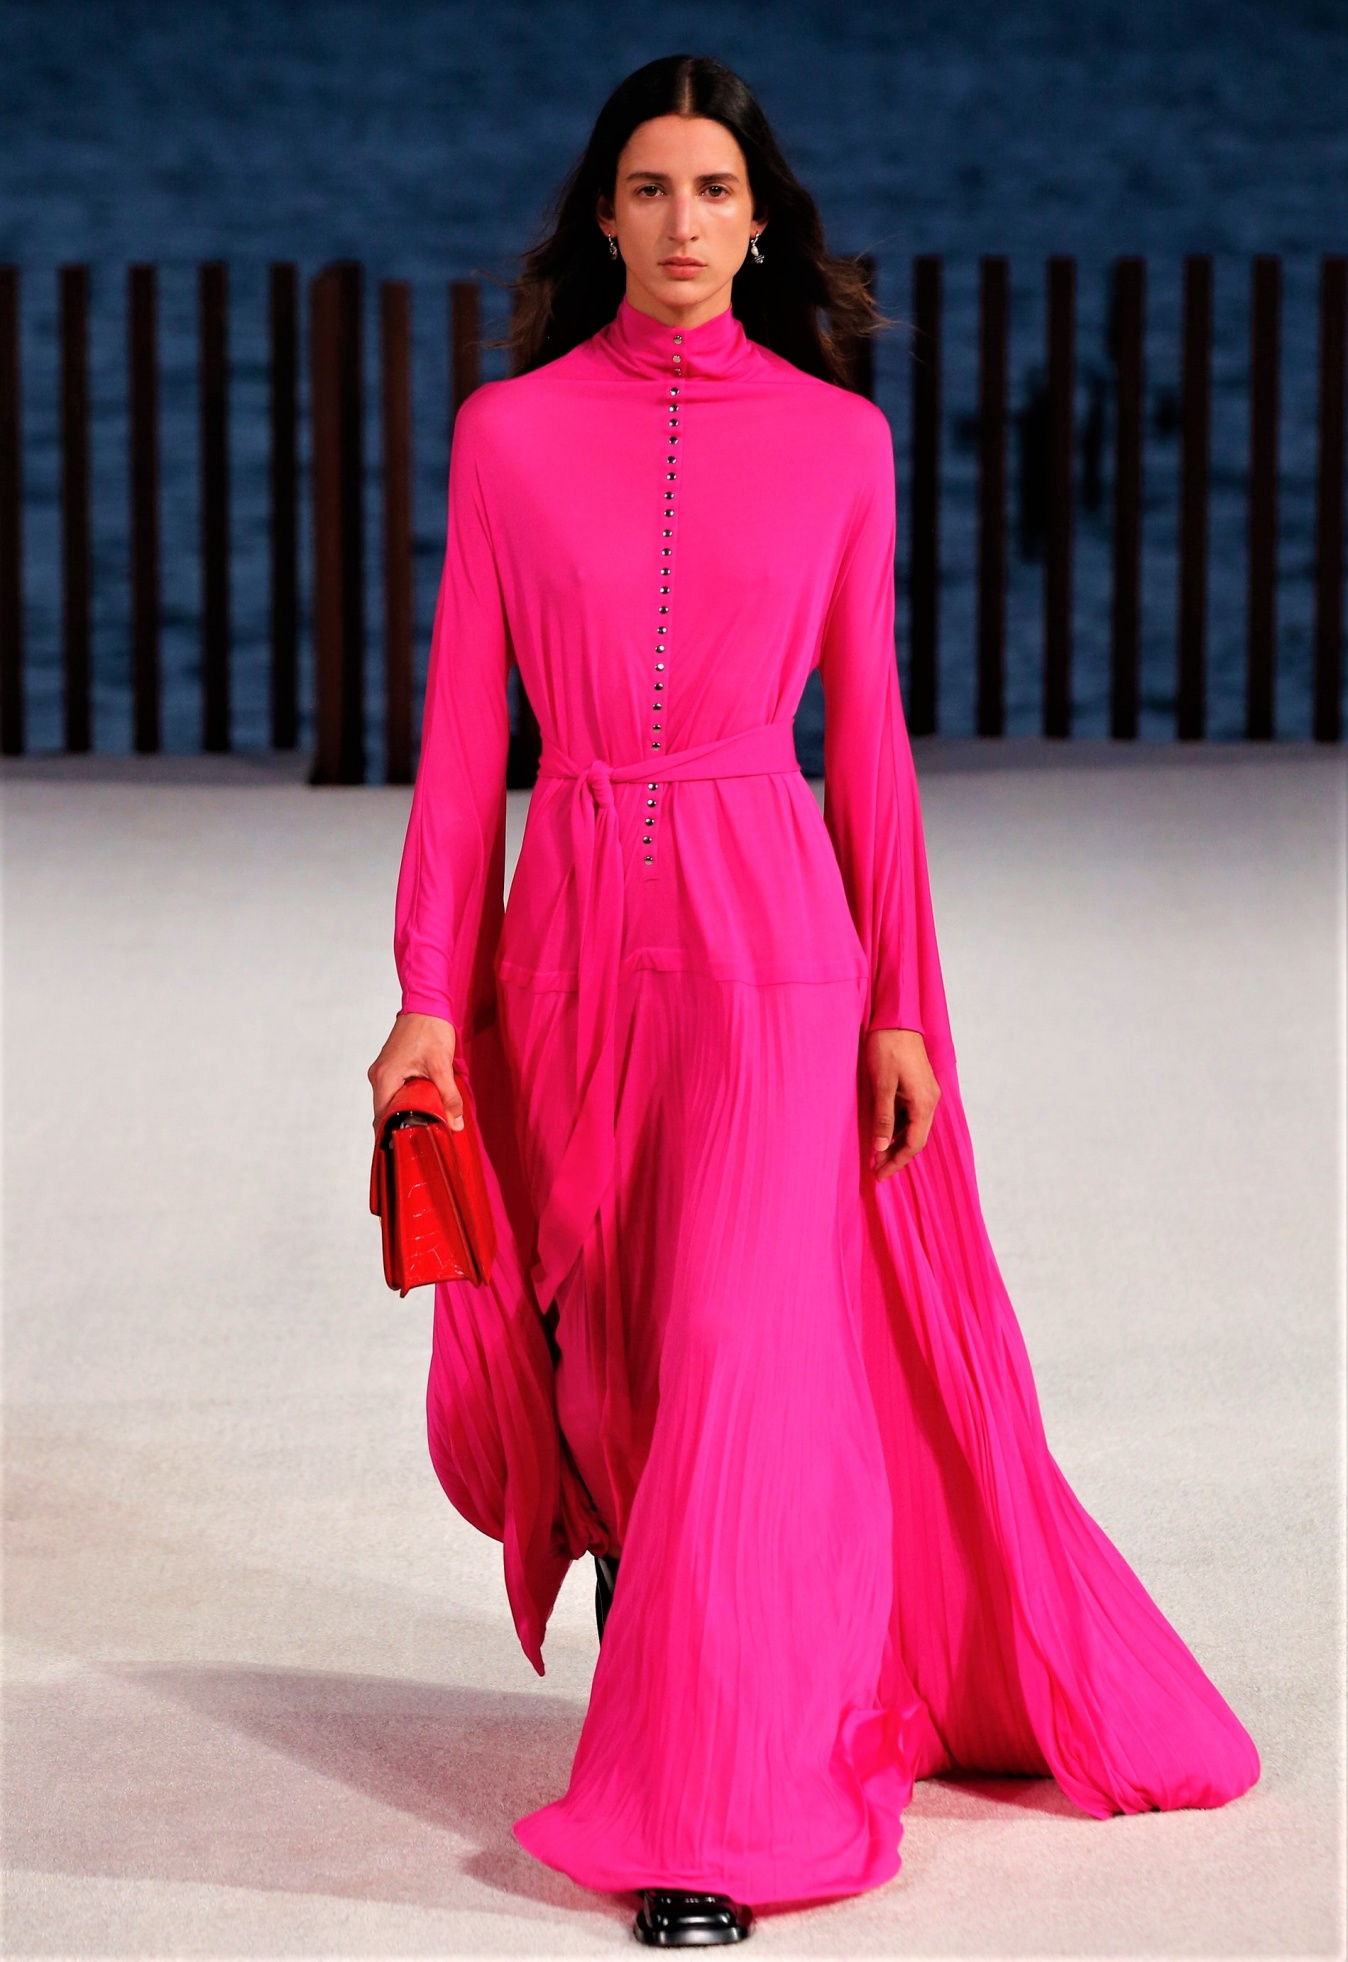 NYFW 9-21 ProS pink gown cropped.jpg